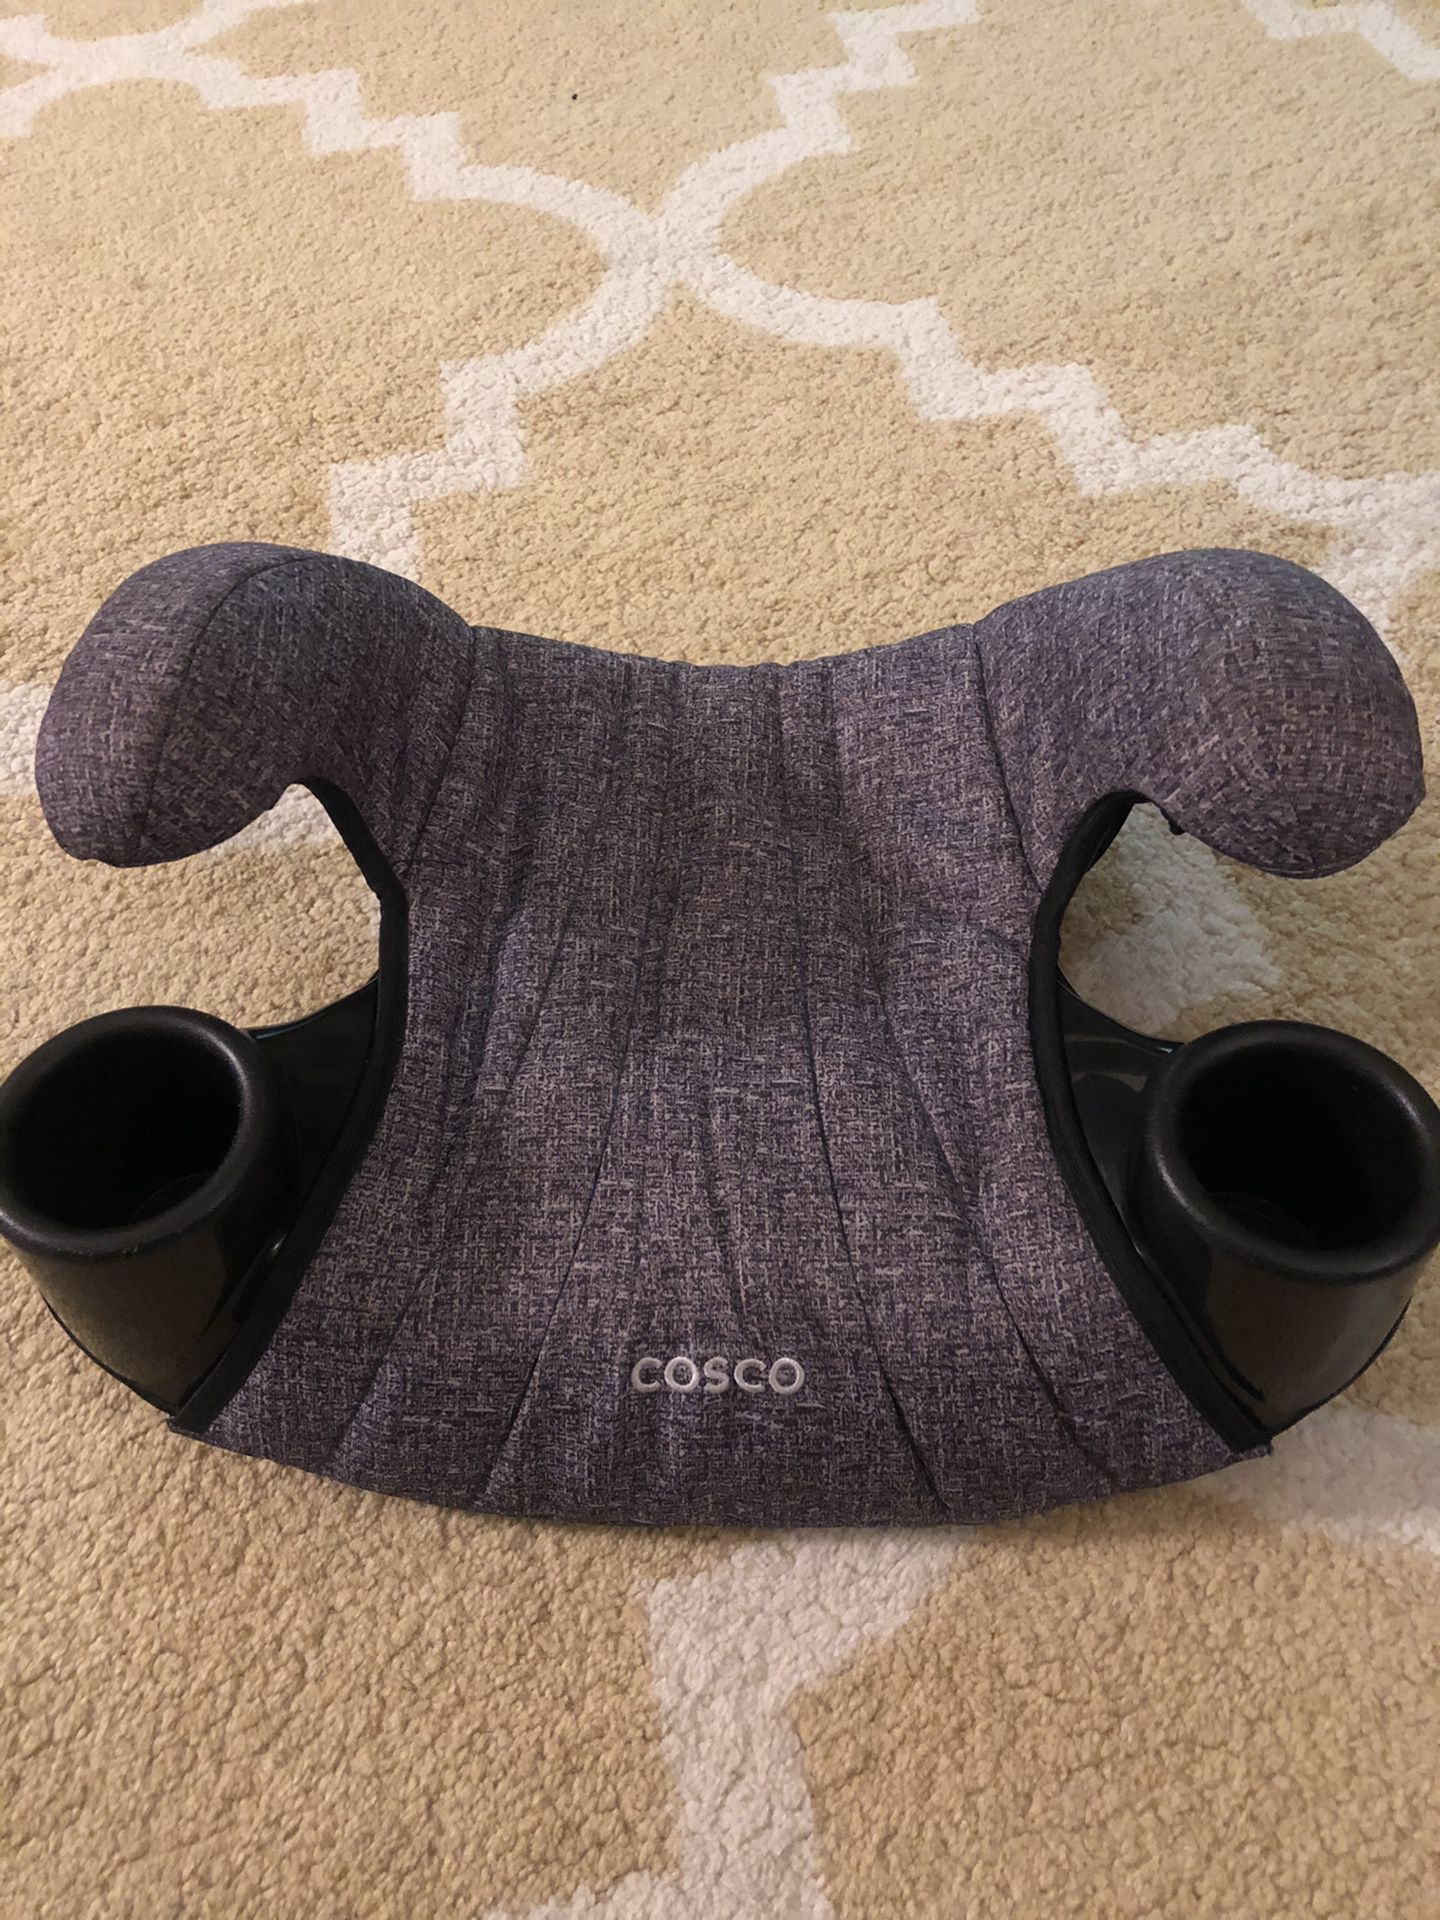 Cosco Grey and black booster seat